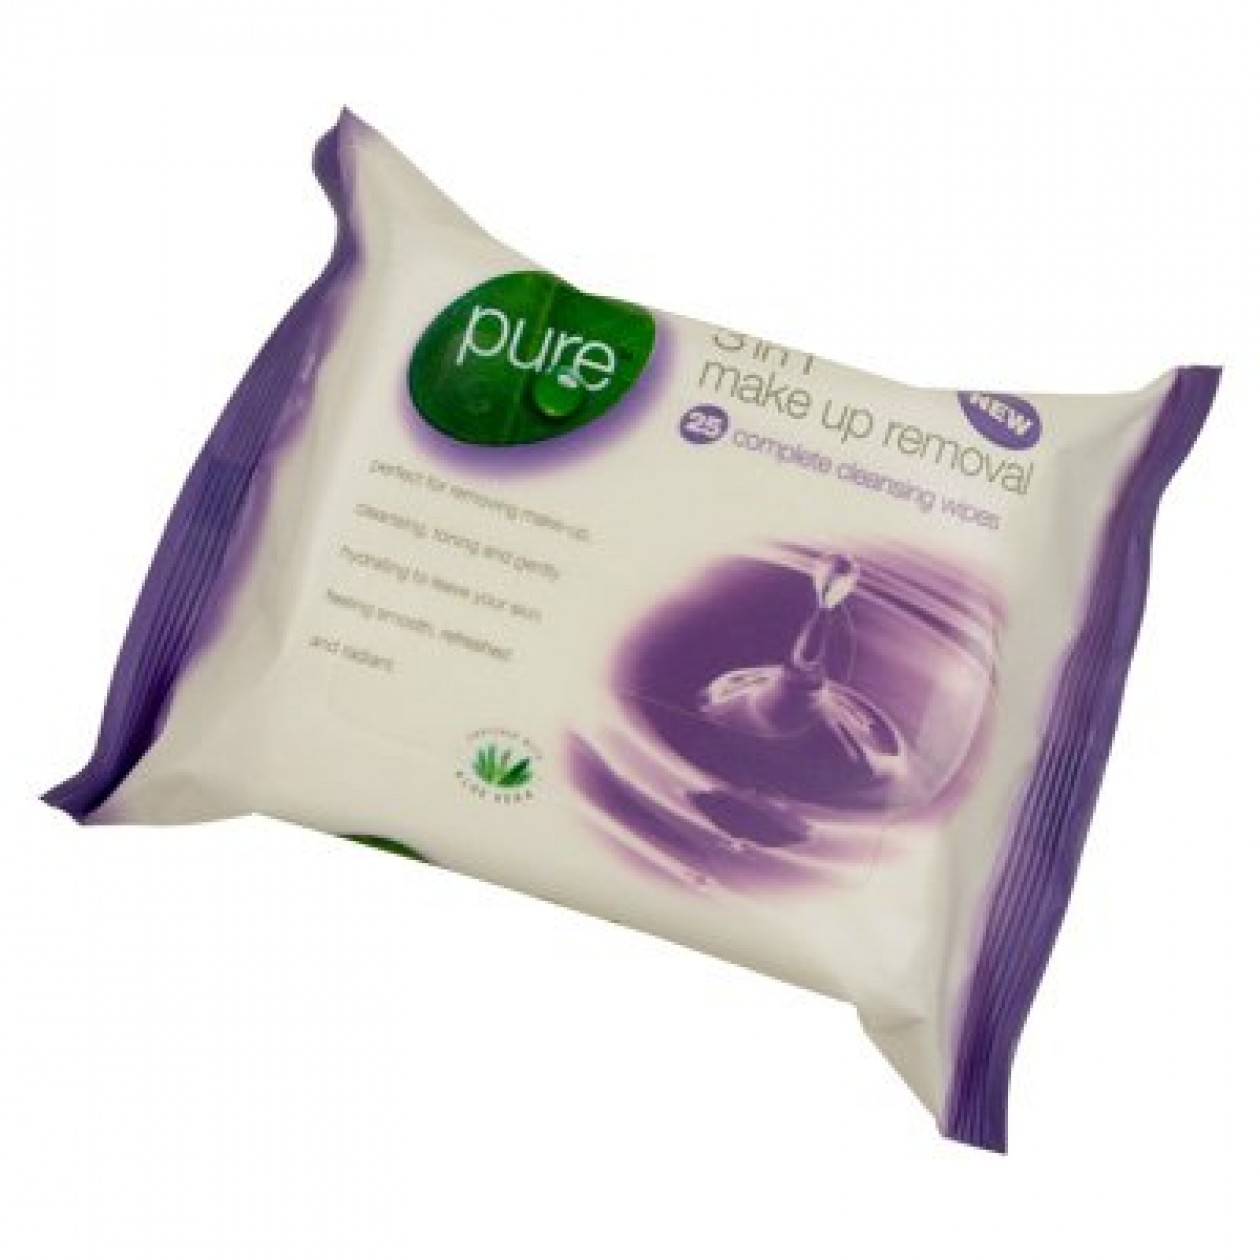 Pure 3 In 1 Makeup Removal Wipes